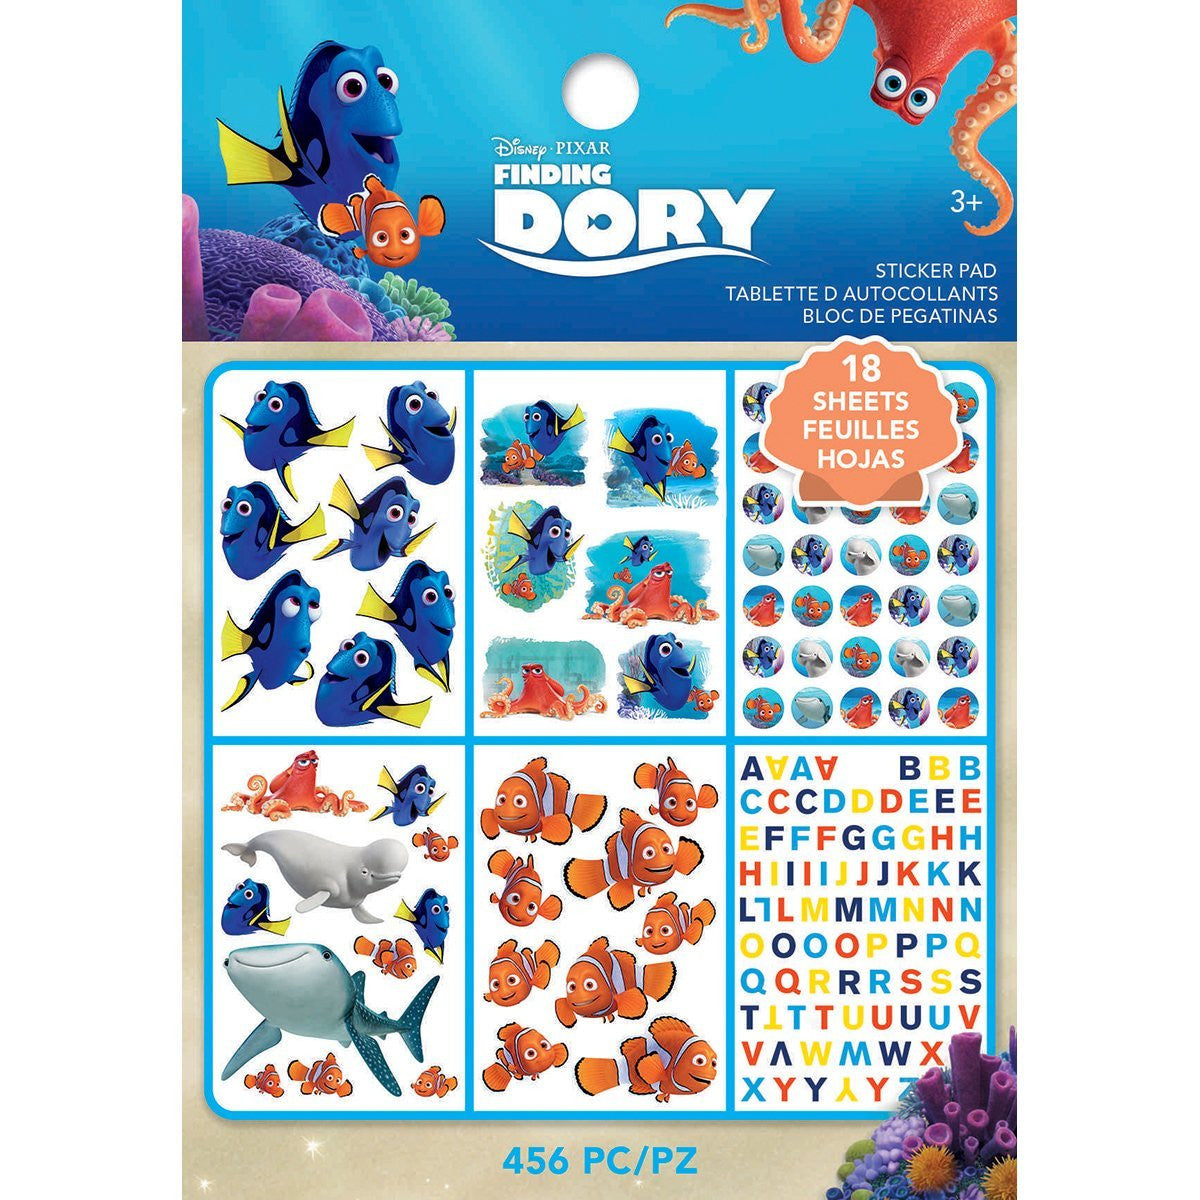 Finding Dory Character Disney Movie Stickers - 18 Sheets - 456 stickers! Nemo